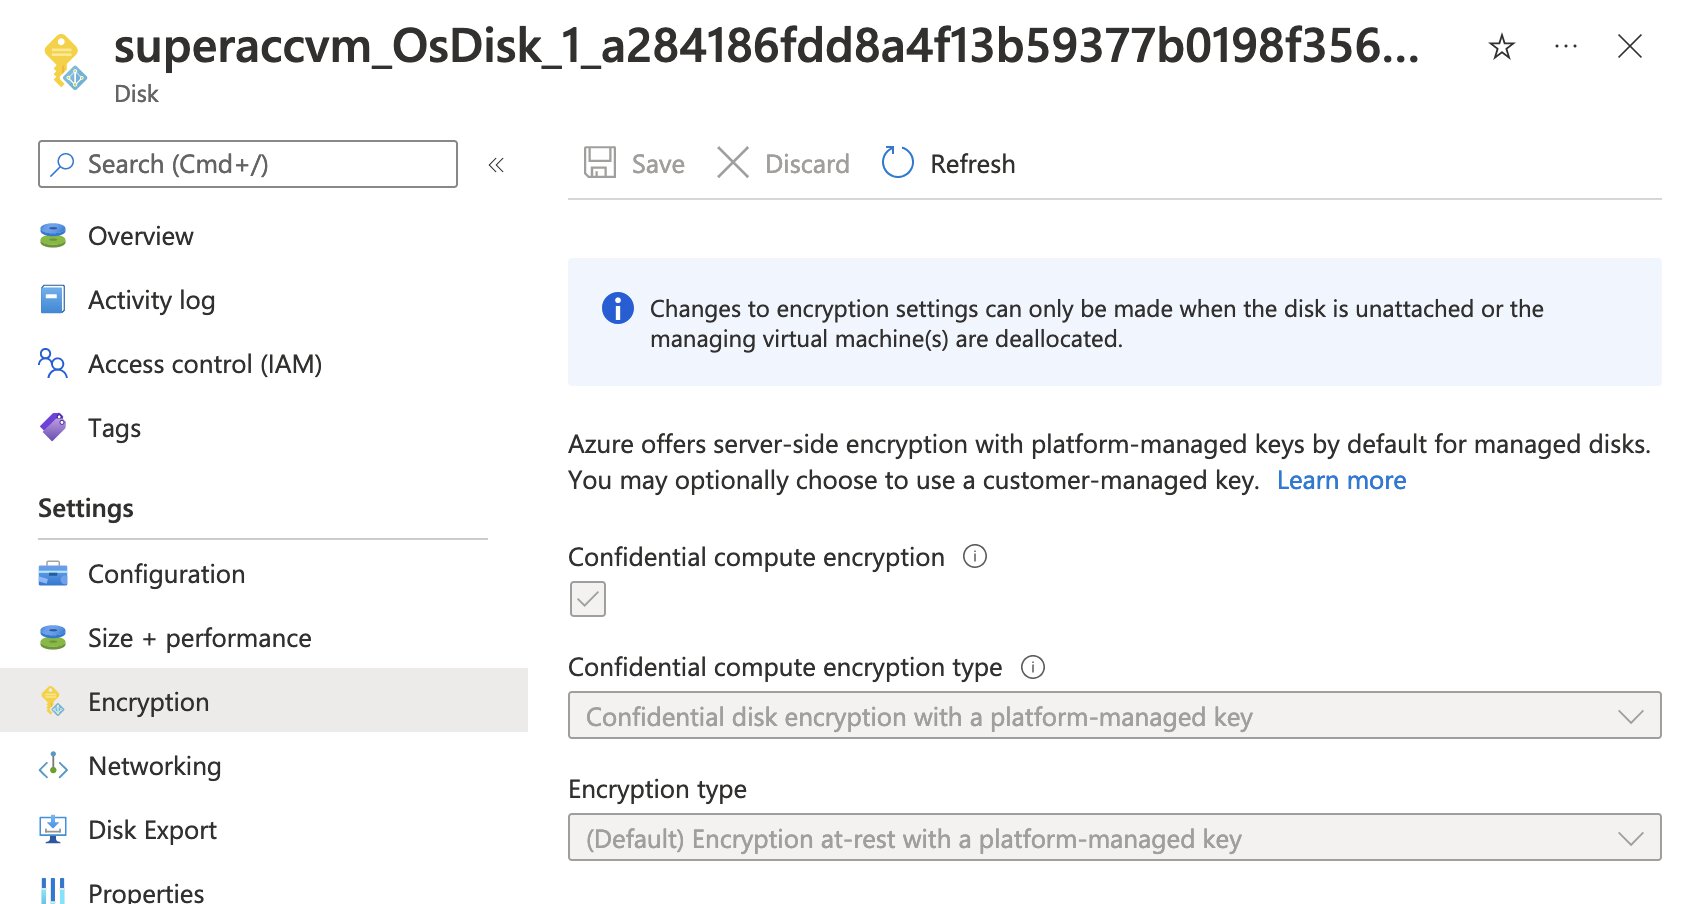 A screenshot of the disk&rsquo;s blade, OS disk encryption. &ldquo;Confidential compute encryption&rdquo; has been enabled.&rdquo; Confidential compute encryption type&rdquo; has been set to &ldquo;confidential disk encryption with a platform-managed key&rdquo;. The &ldquo;Encryption type&rdquo;, used for encryption at rest, is set to use a platform-managed key which is also the default.